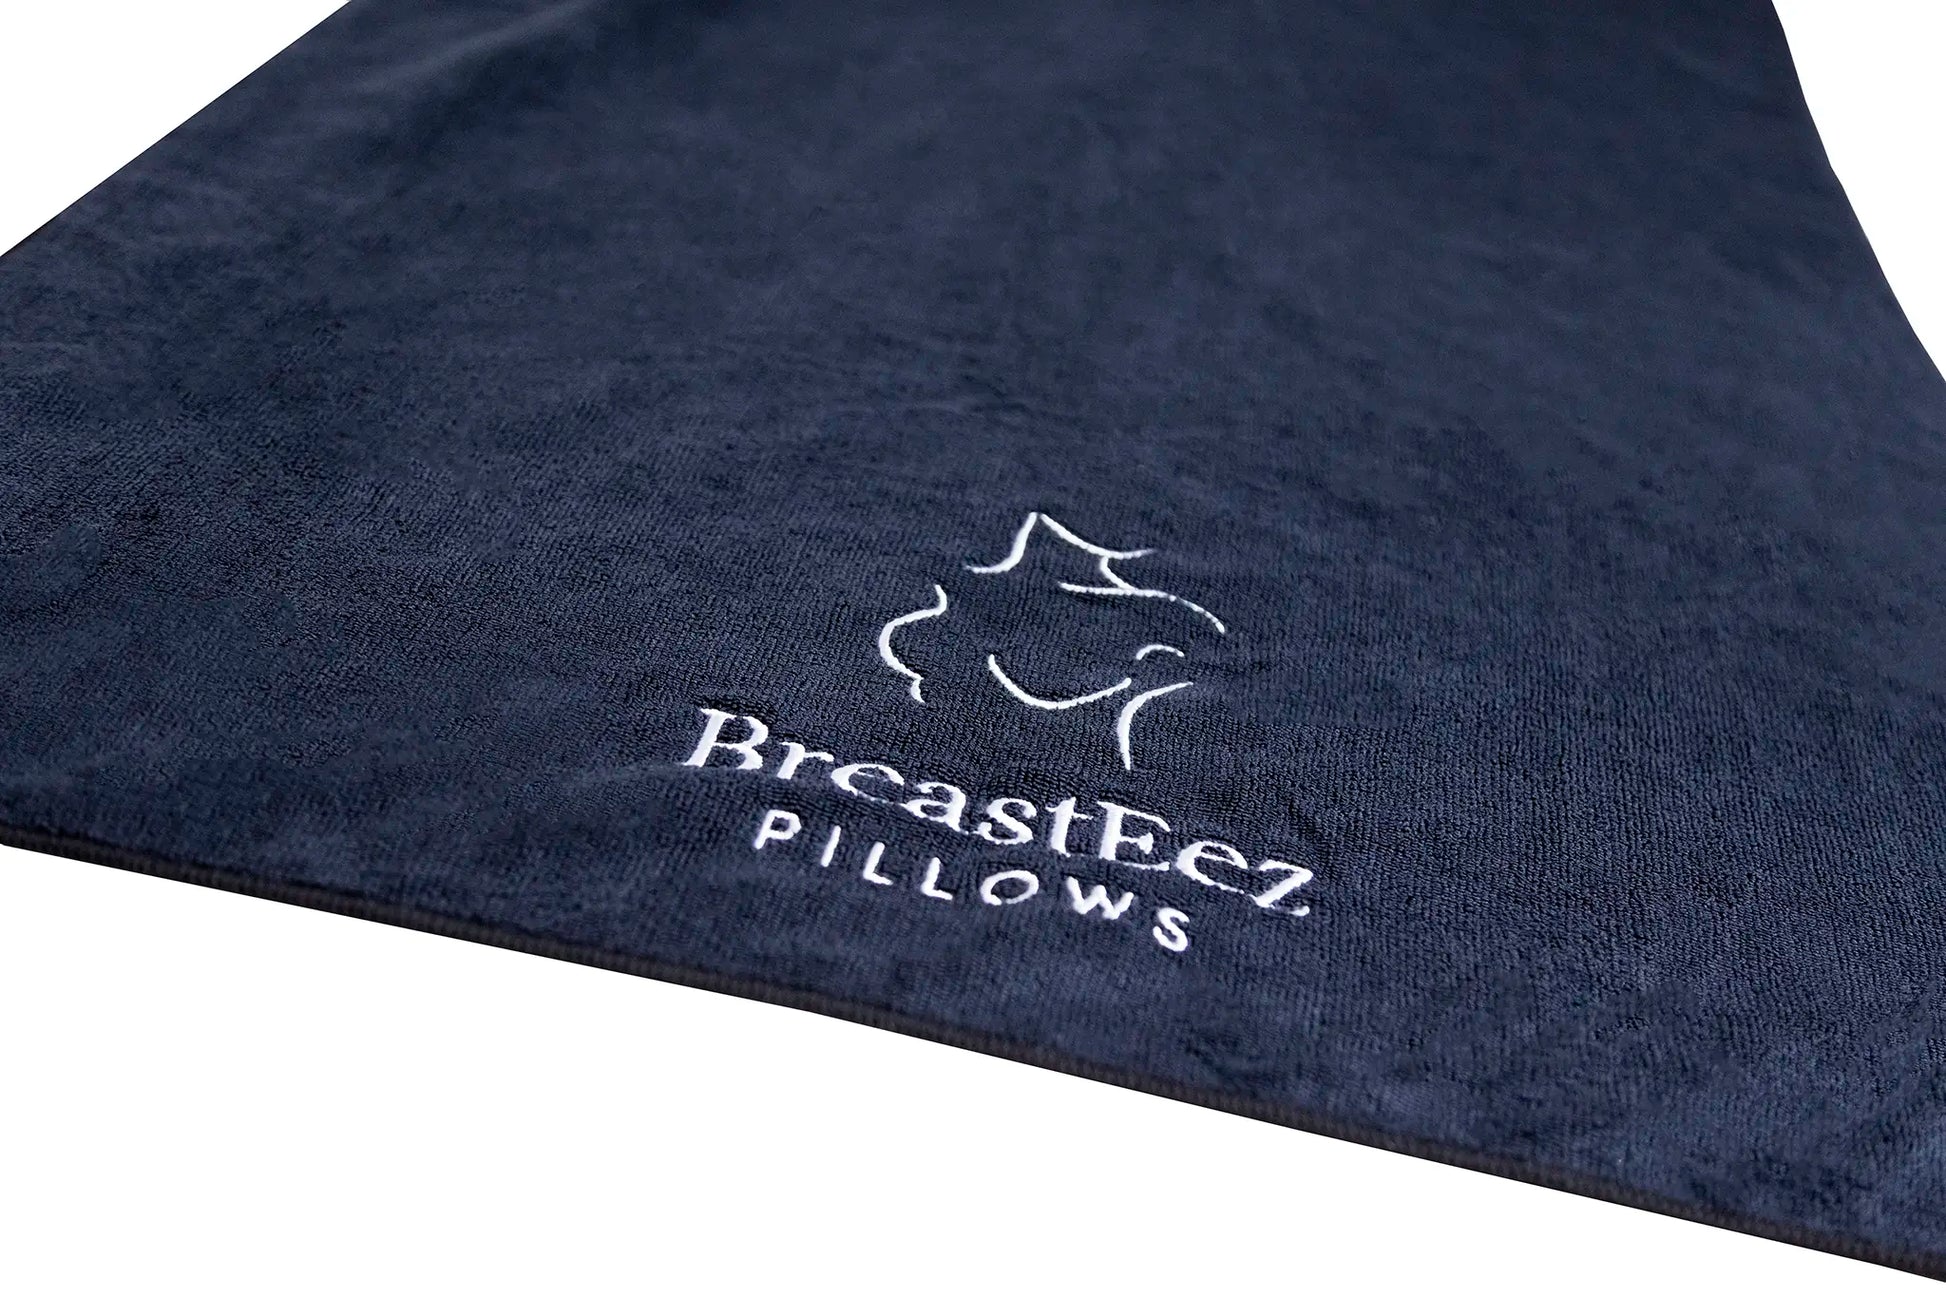 BreastEez yoga towel super absorbent non slip and quick drying navy